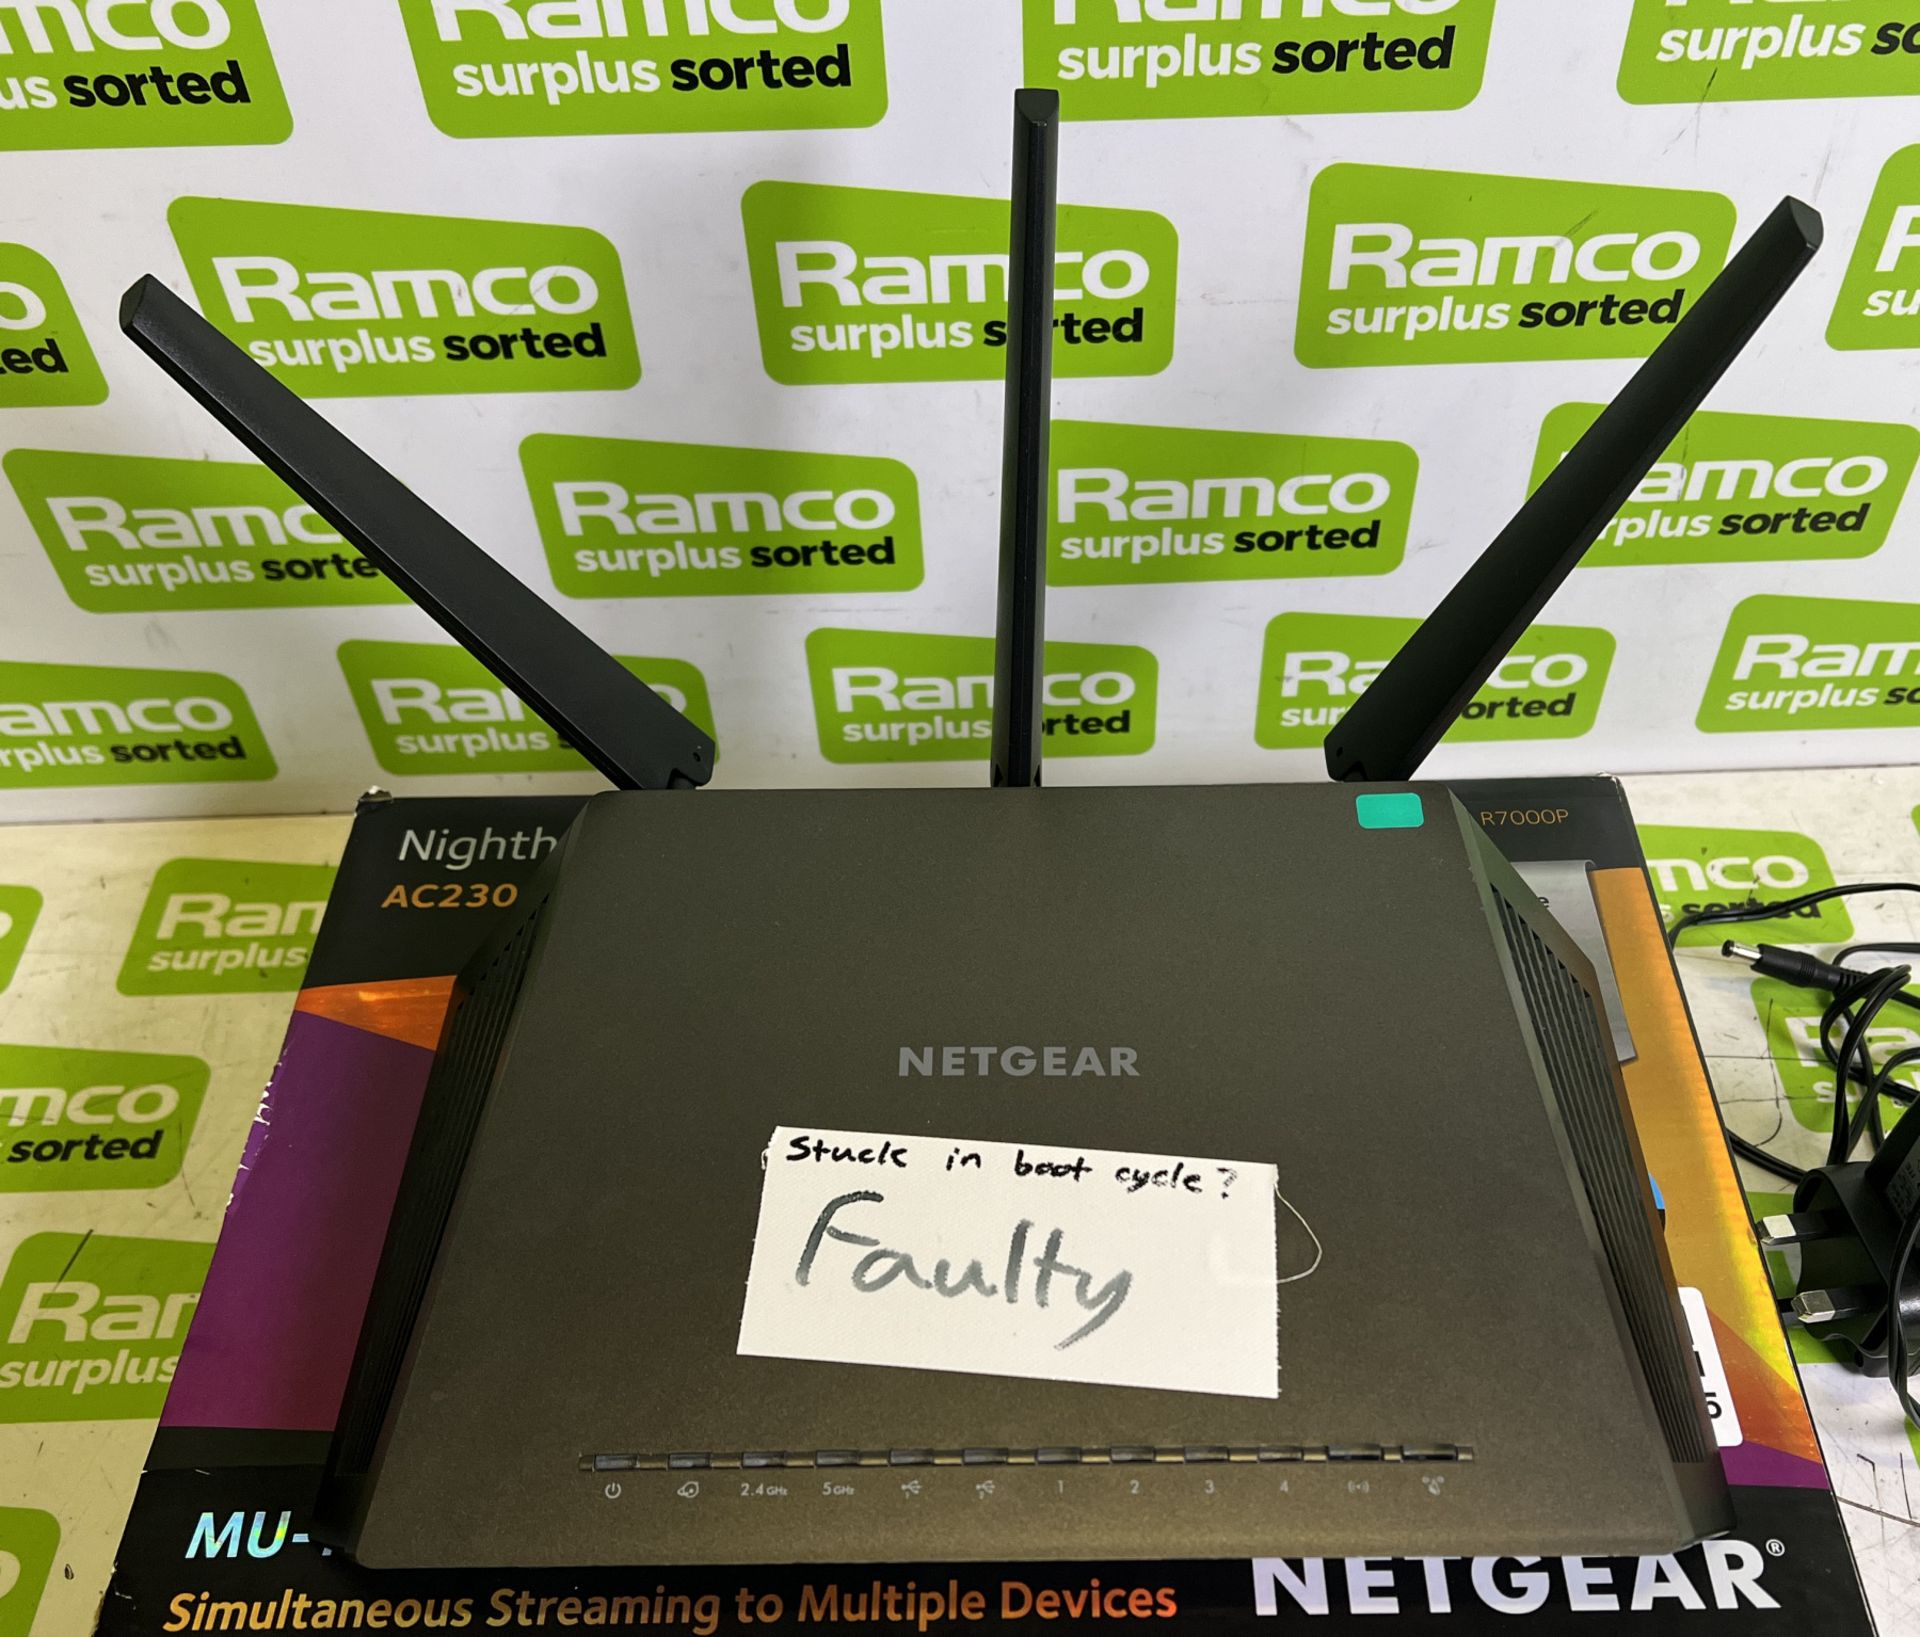 Netgear Nighthawk AC2300 smart wifi router - STUCK IN BOOT CYCLE - Image 2 of 4